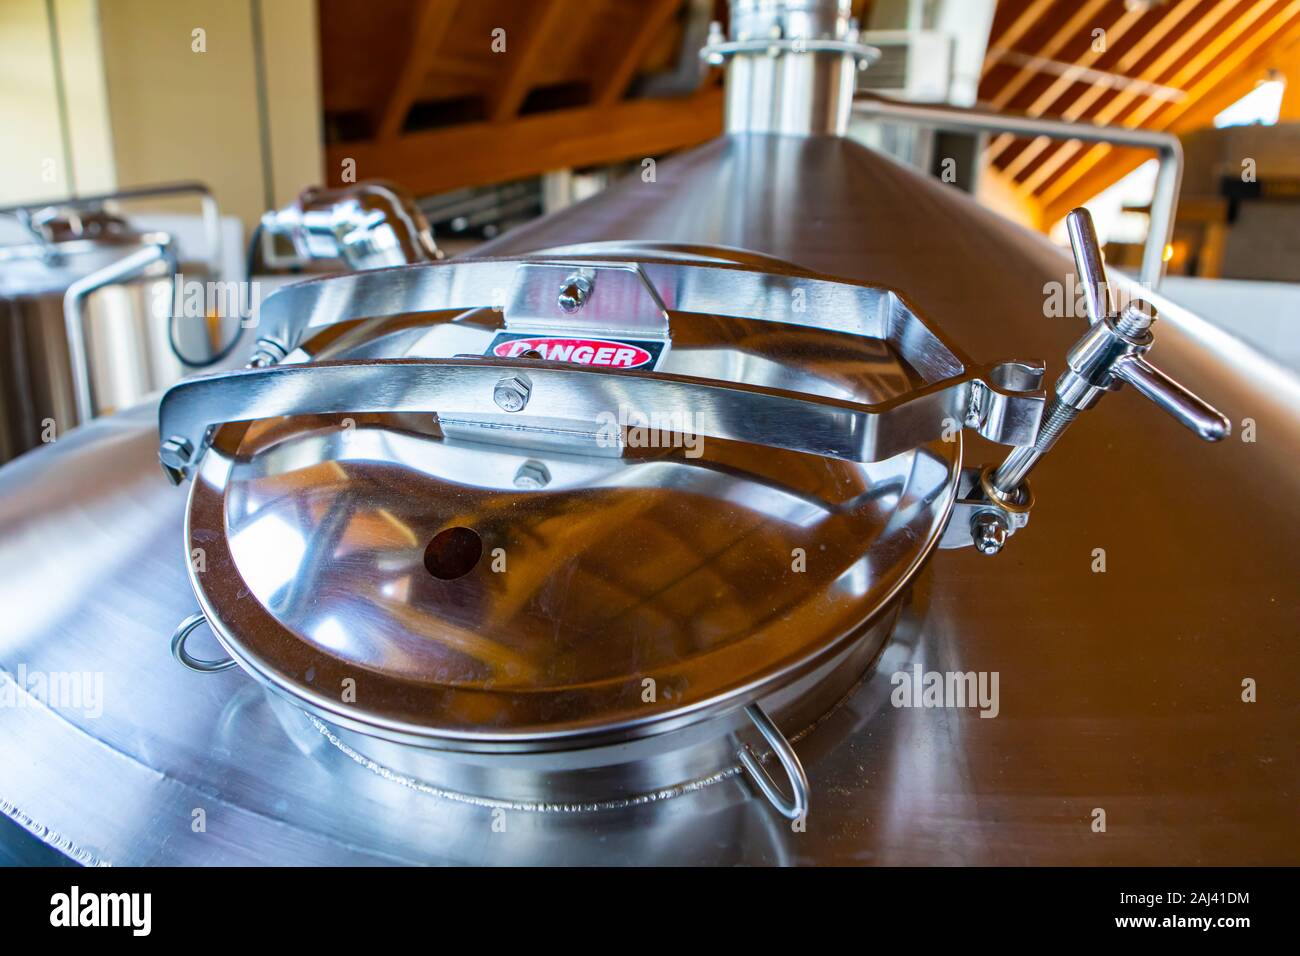 stainless steel tank, vessel closed rounded top manway, manhole door danger sign, brewhouse brewery beer factory machine, selective focus view Stock Photo